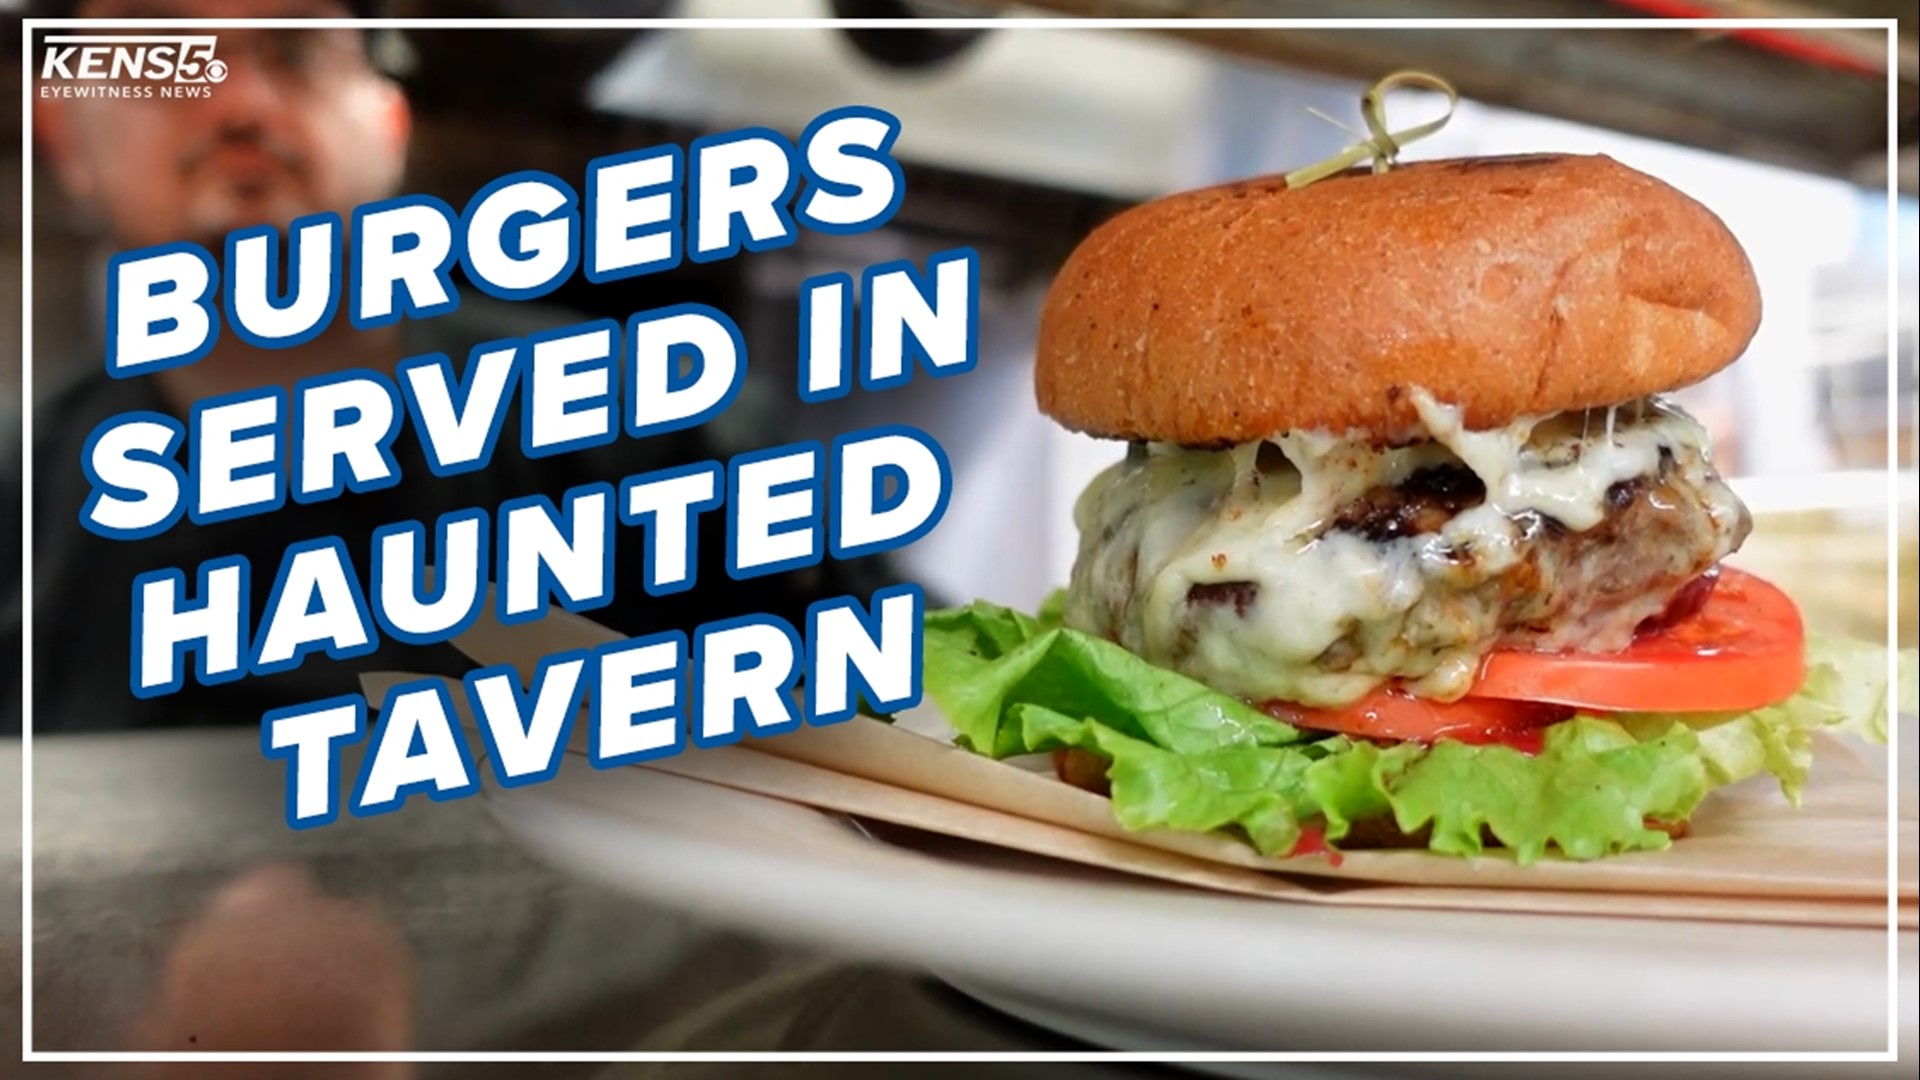 The Esquire Tavern has been a staple in downtown San Antonio for 89 years with scary good food.